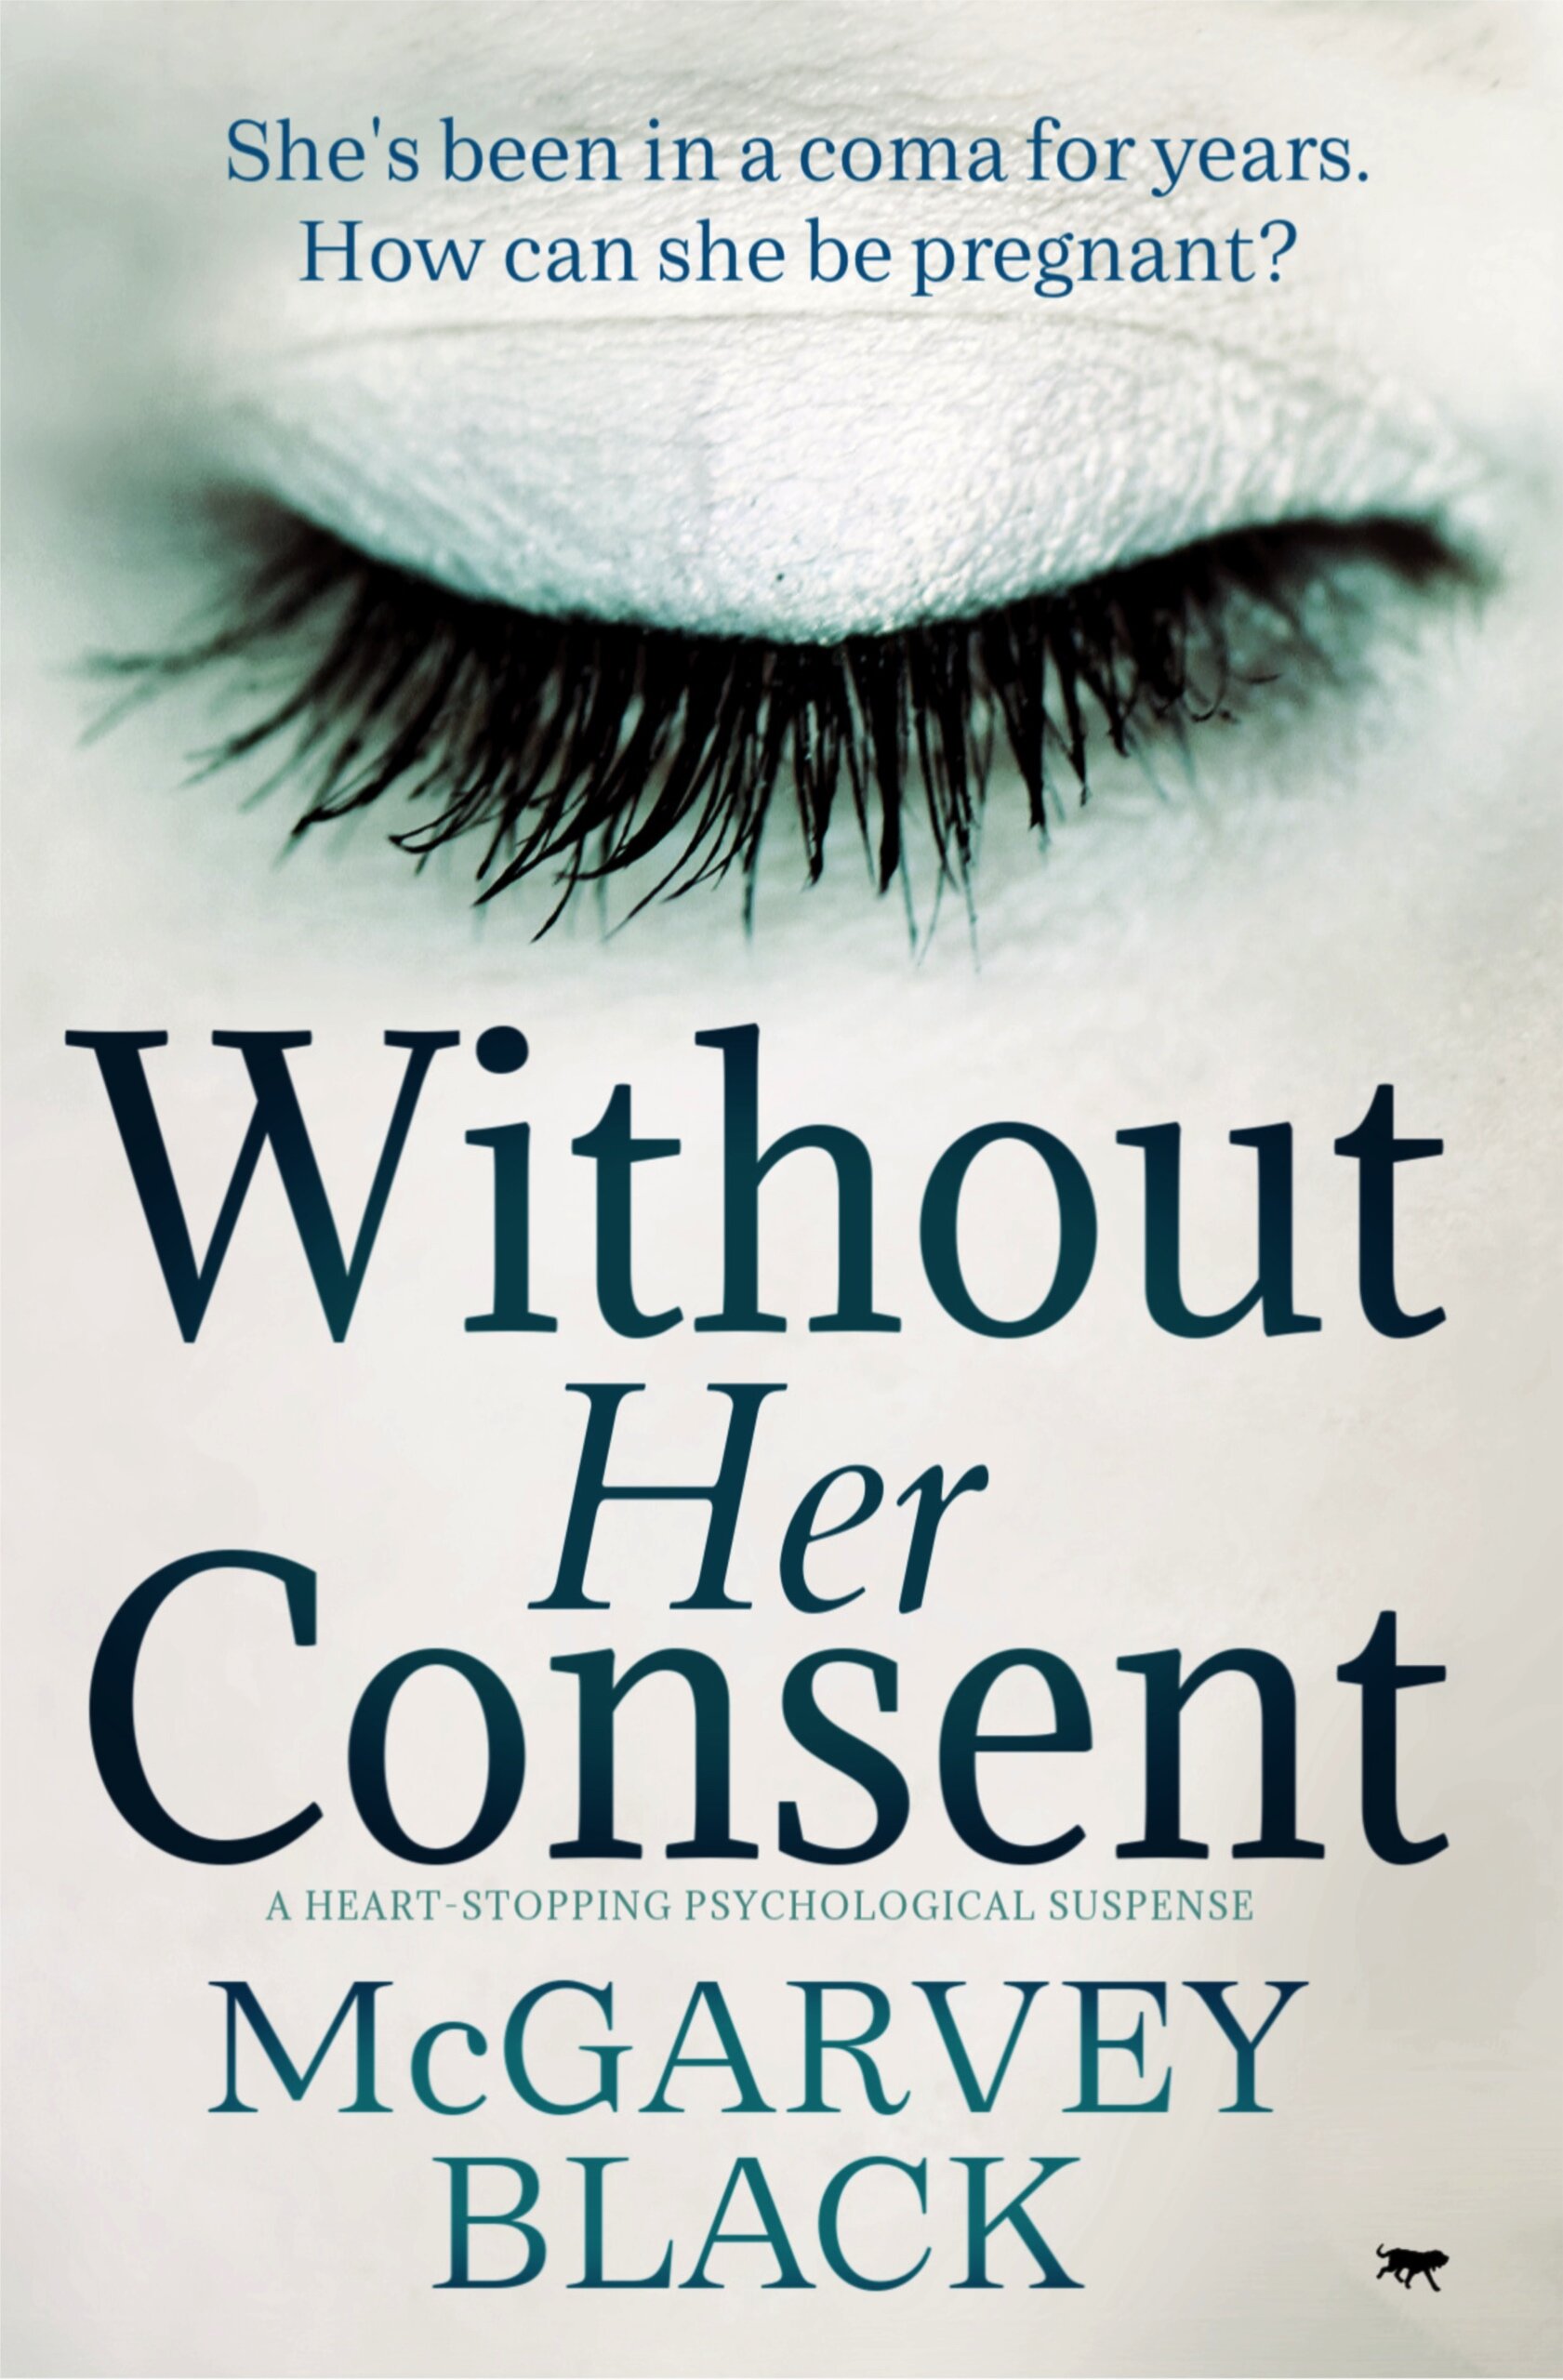 Without-Her-Consent-Kindle.jpg